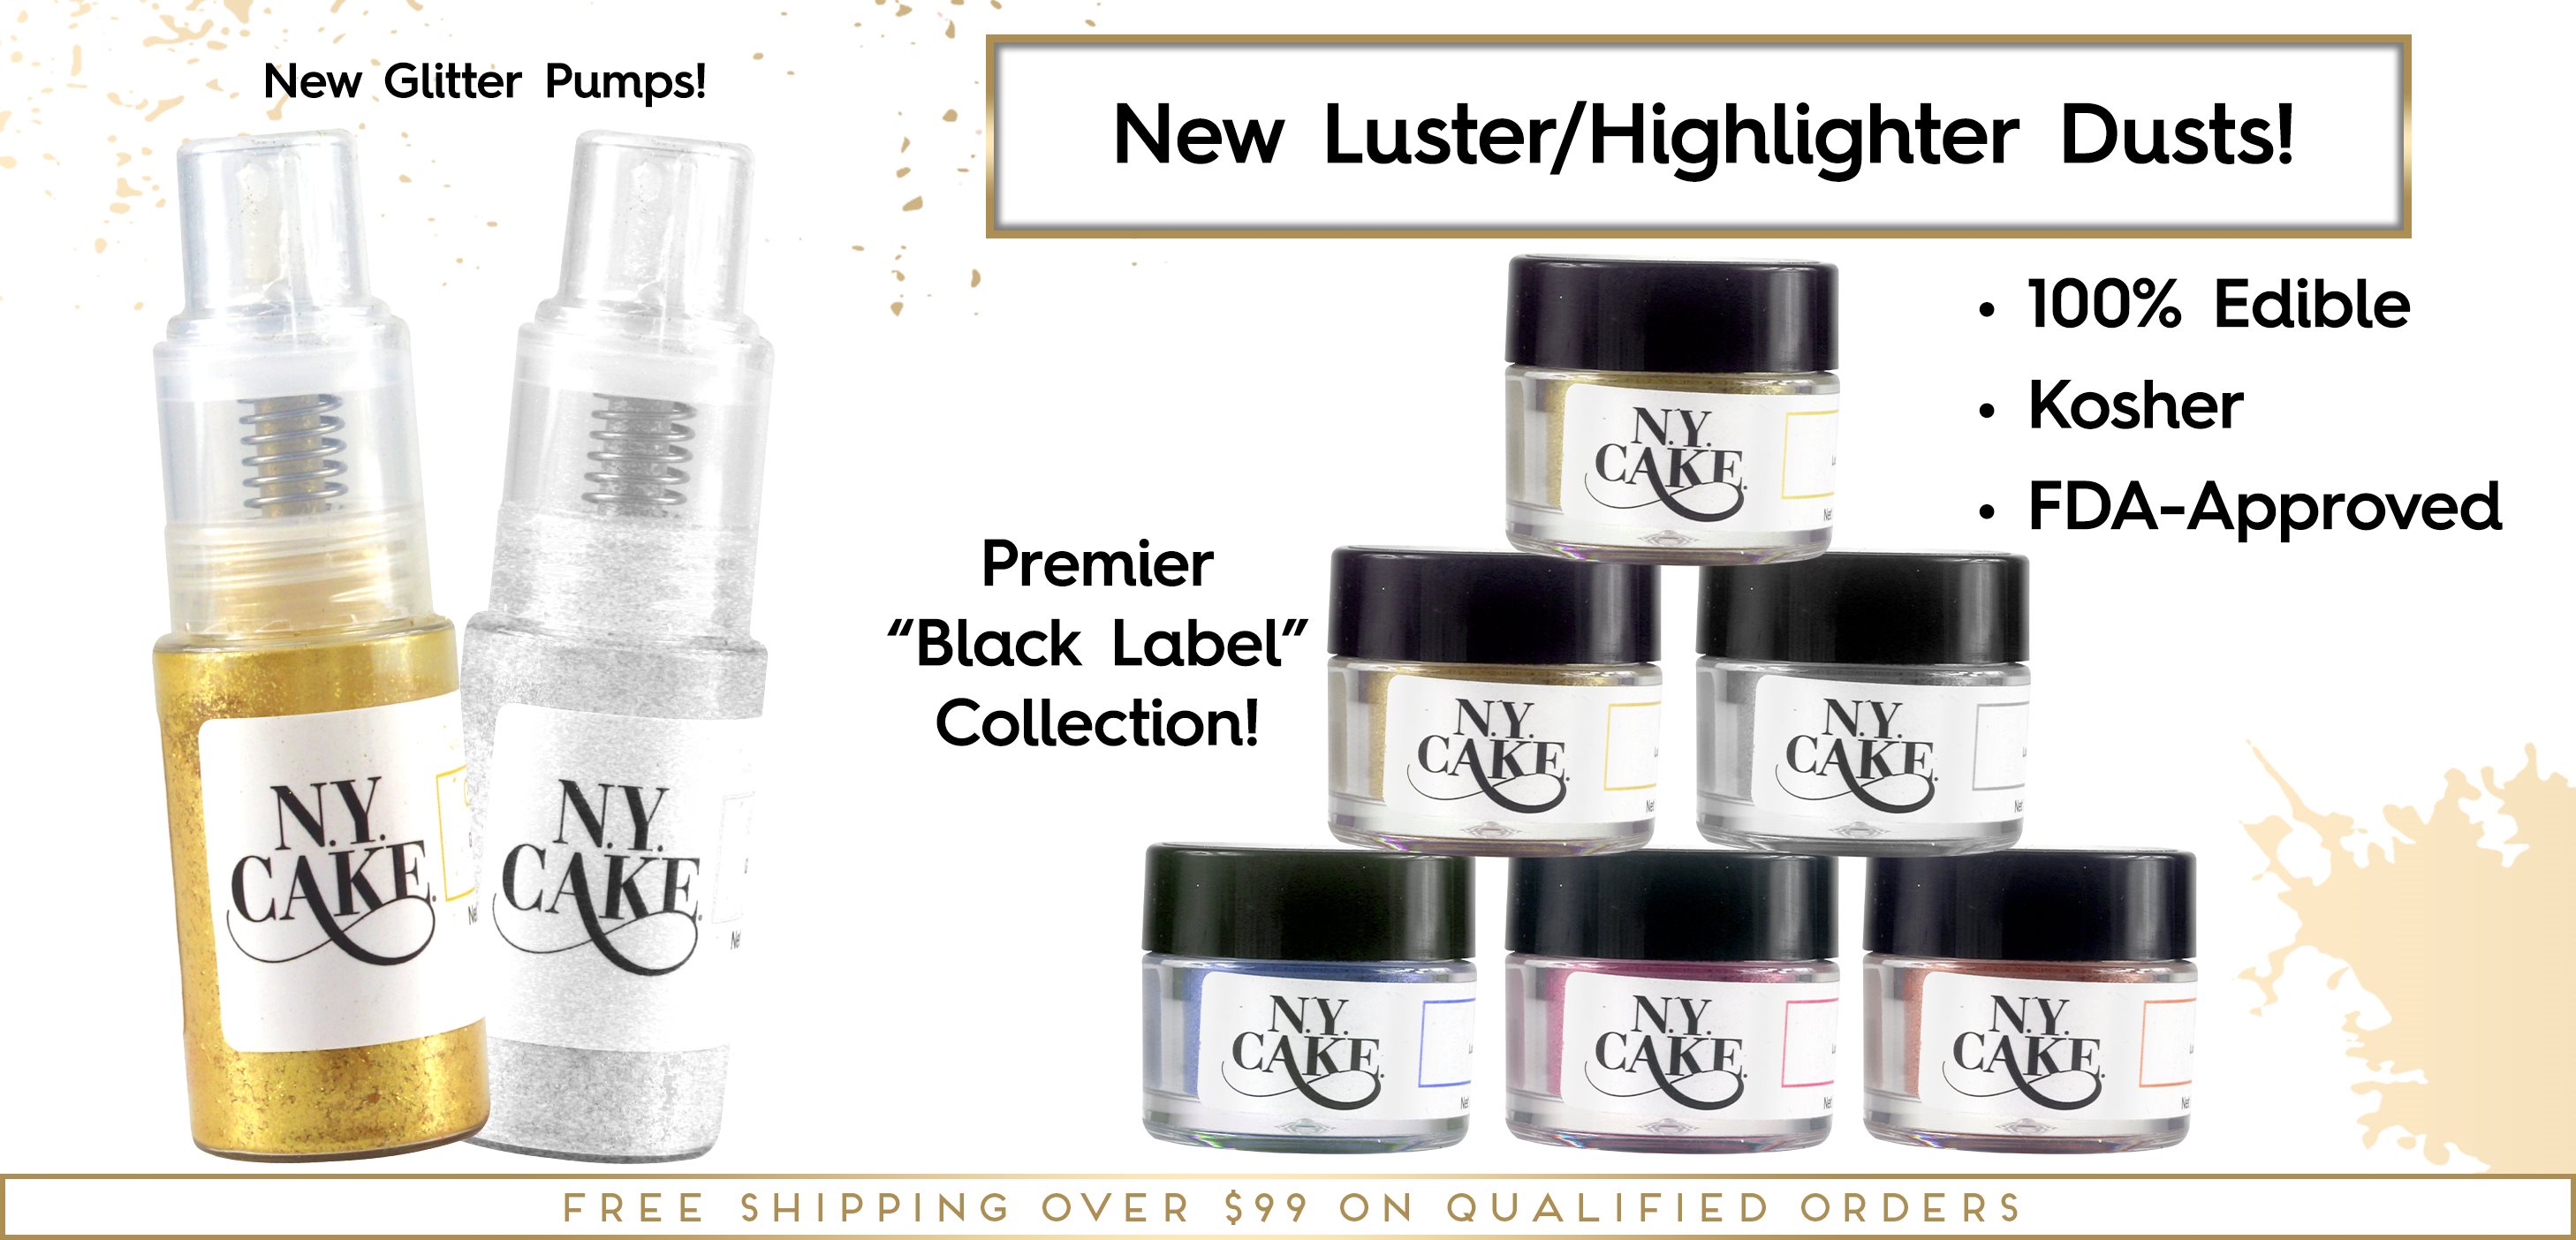 NY Cake Luster Highlighters Glitter Pumps Black Label Collection